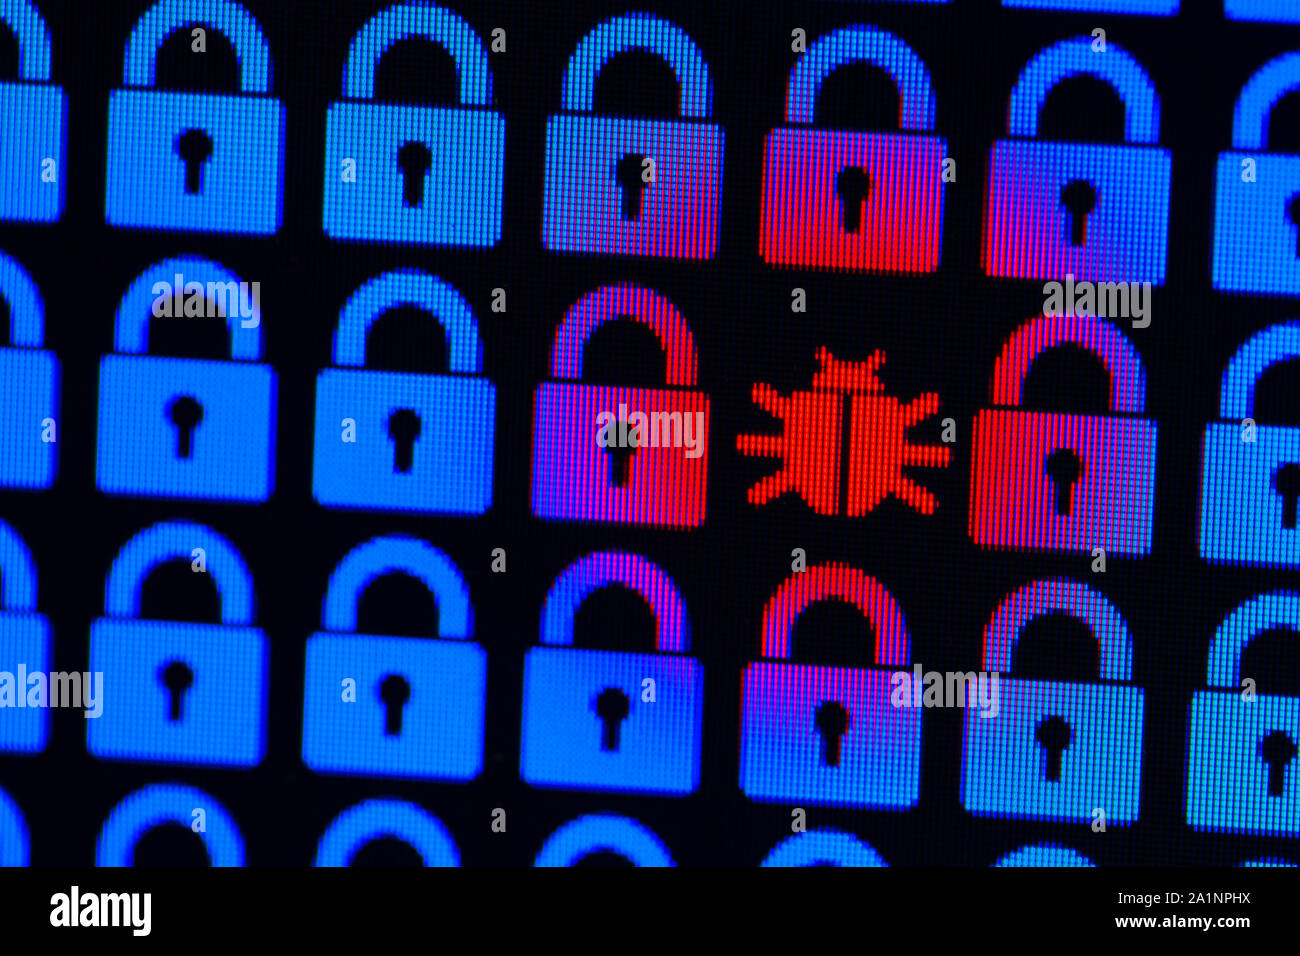 Bug As A Symbol Of Malware And A Trojan Virus In The Program Code Hacking And Theft Of Personal Information And Data Blue Pixel Locks And Red Bug On A Black Background